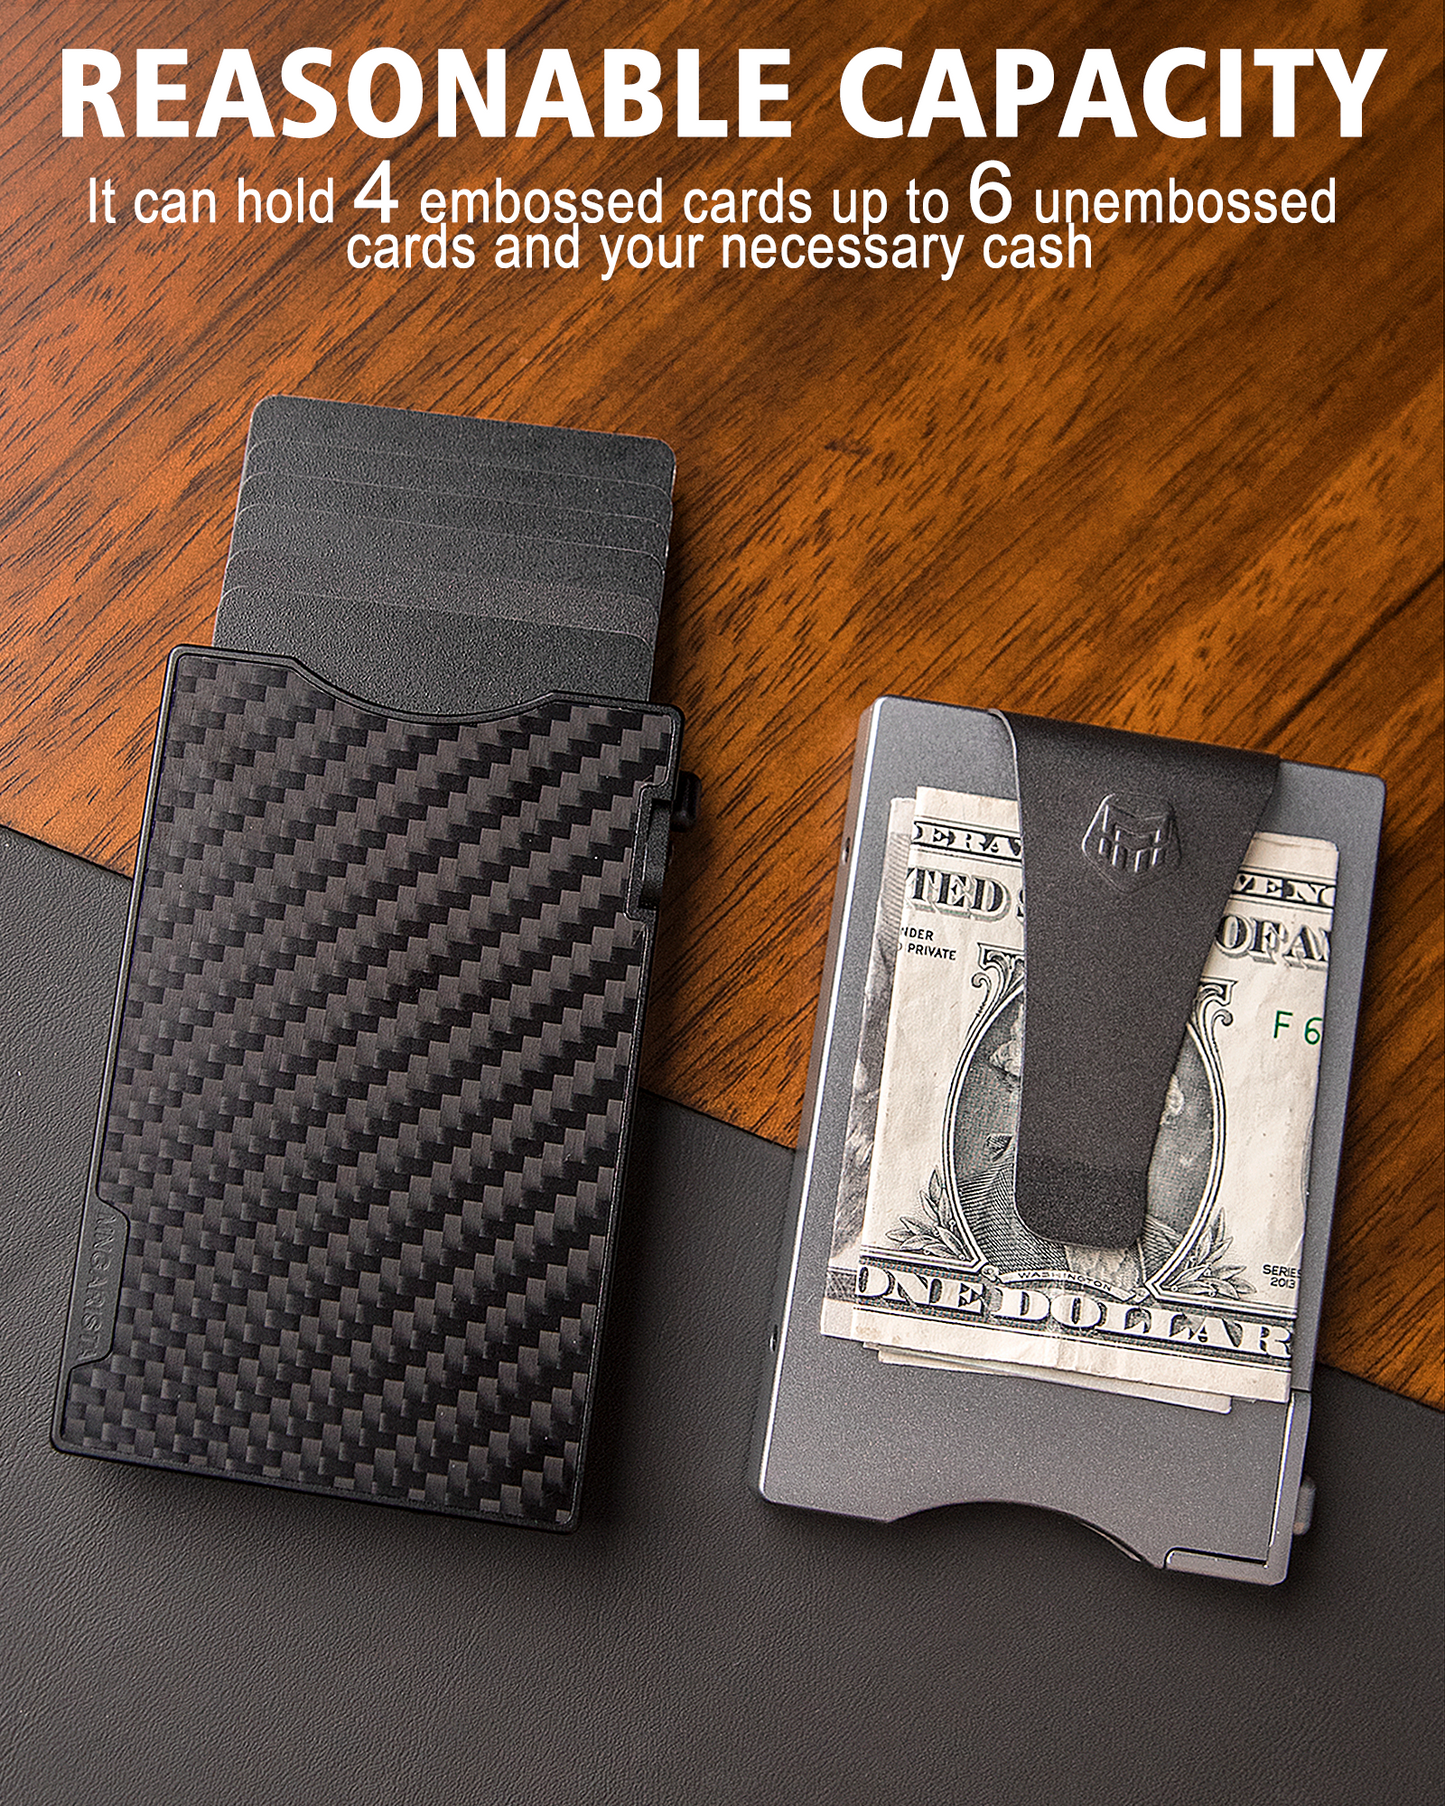 Mngarista pop-up metal card holder wallet,black secrid metallic, Holding 6 cards, Clip the dollars. On the woodgrain table